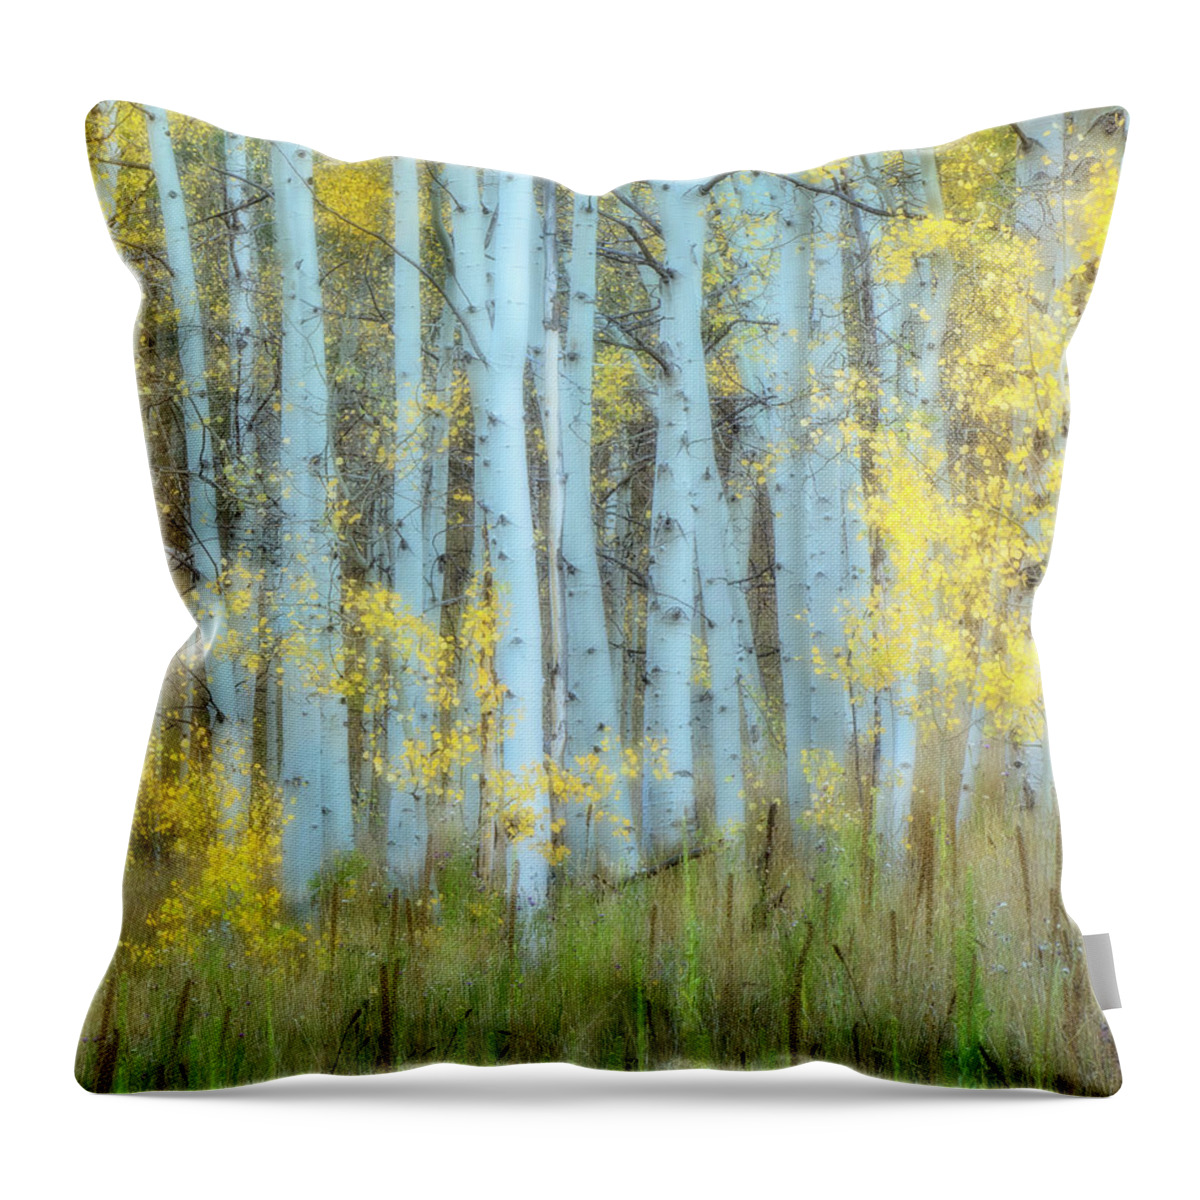 Colorado Throw Pillow featuring the photograph Lines by Judi Kubes